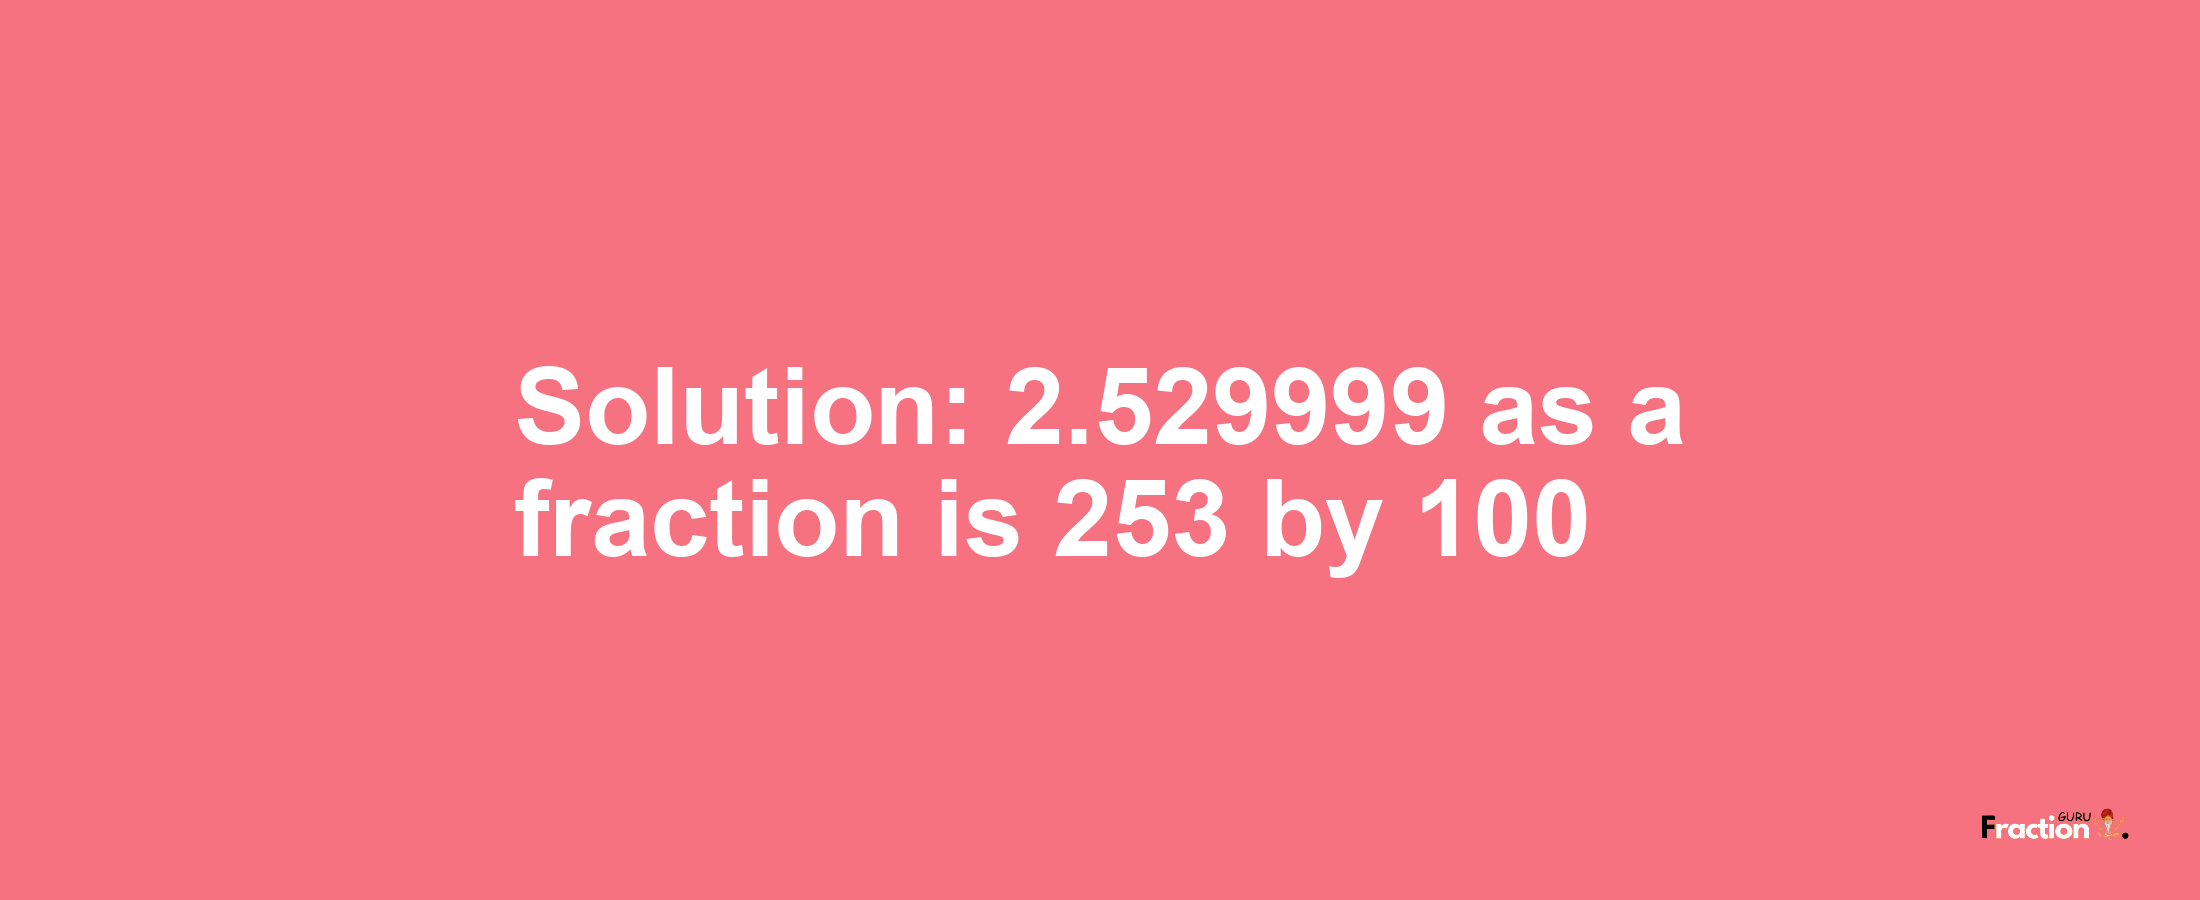 Solution:2.529999 as a fraction is 253/100